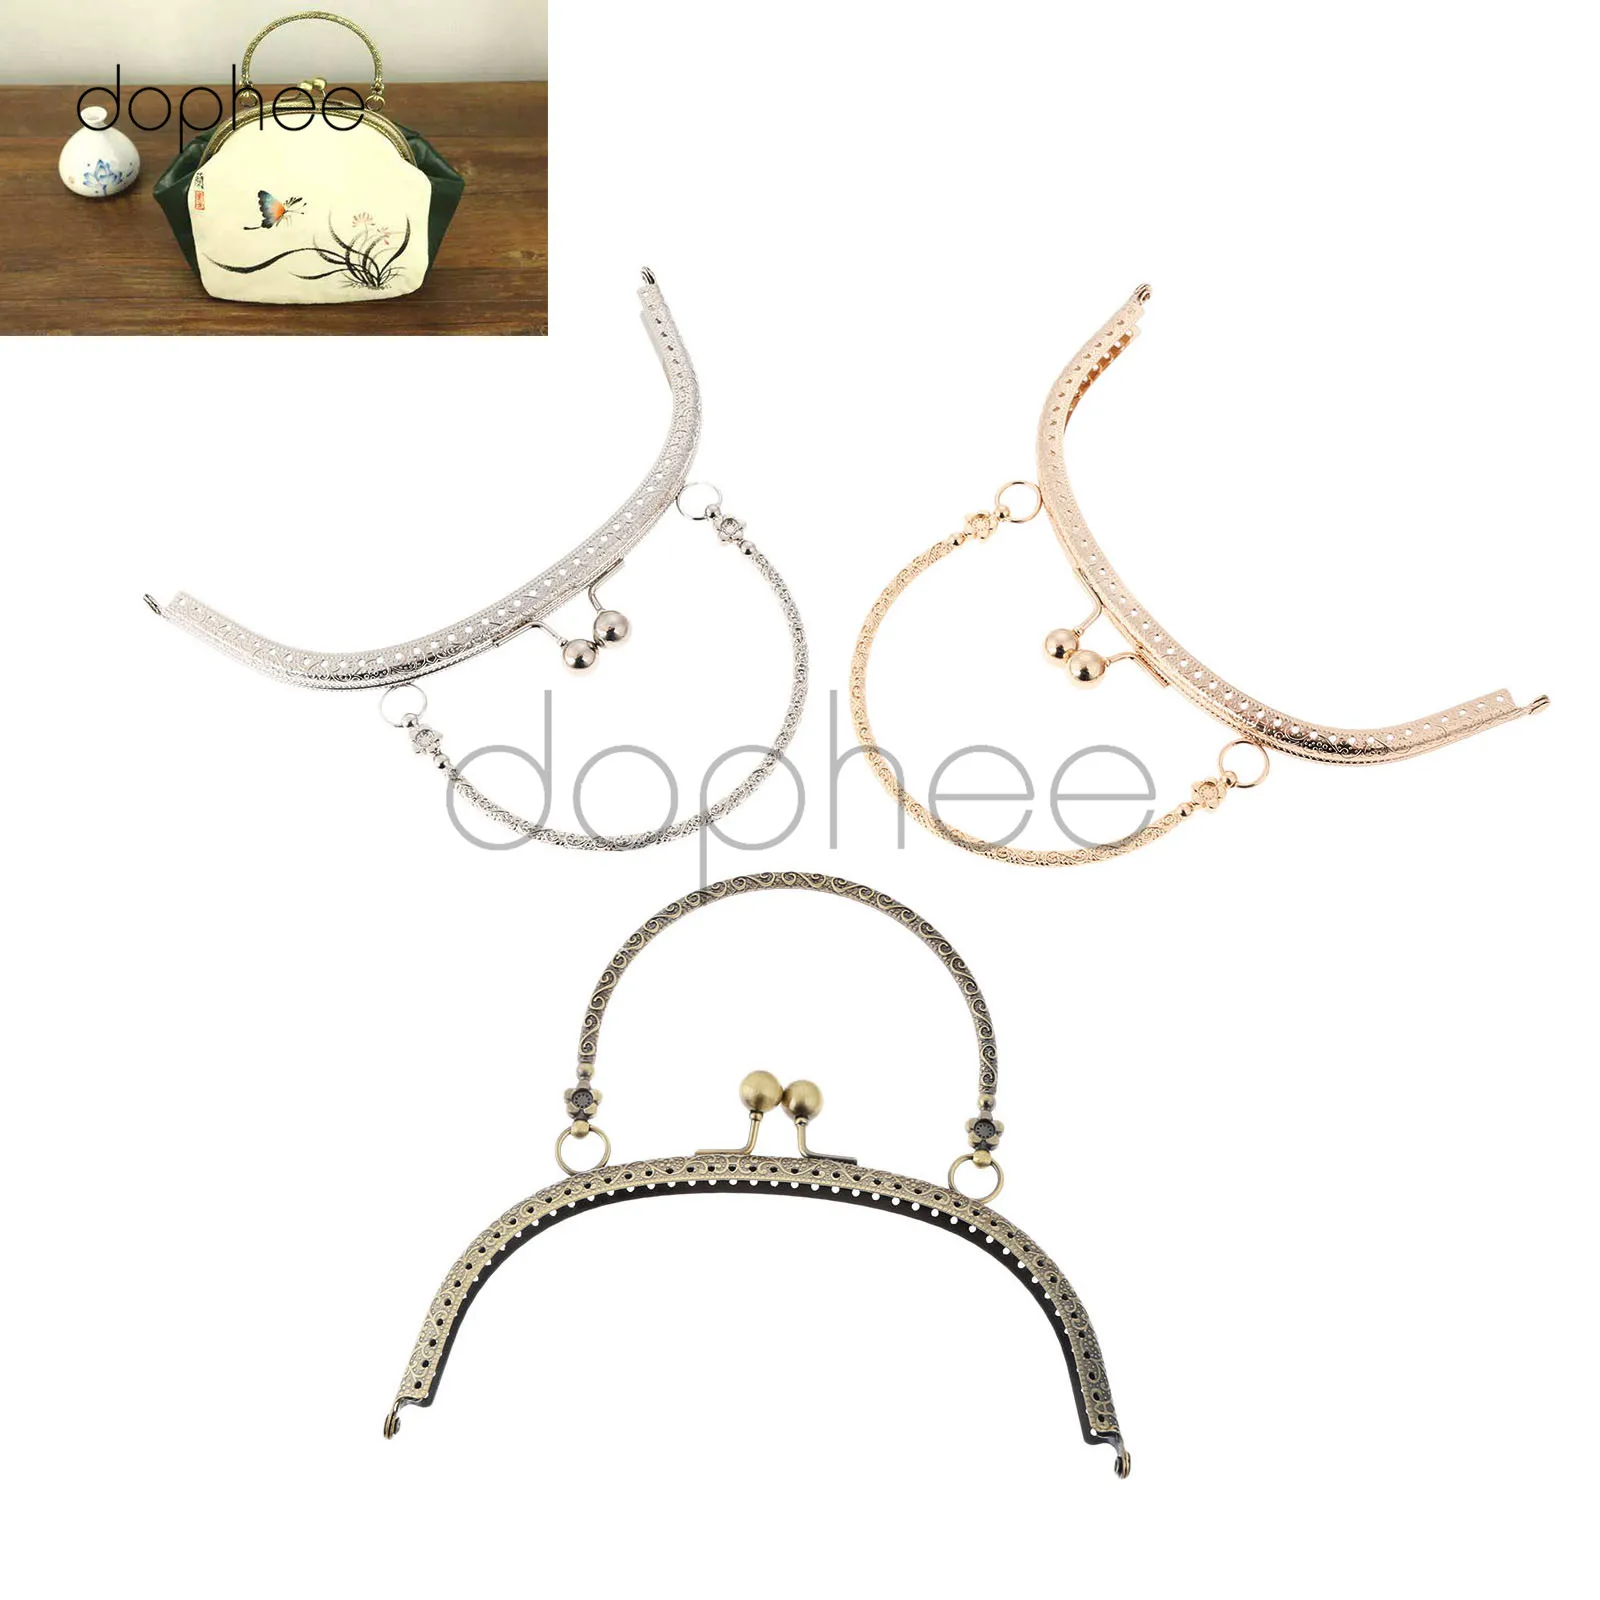 

dophee 1pcs 16.5cm Arch Flower Meta Frame Kiss Clasp Handle Lock 3Colors For DIY Coin Bag Accessories